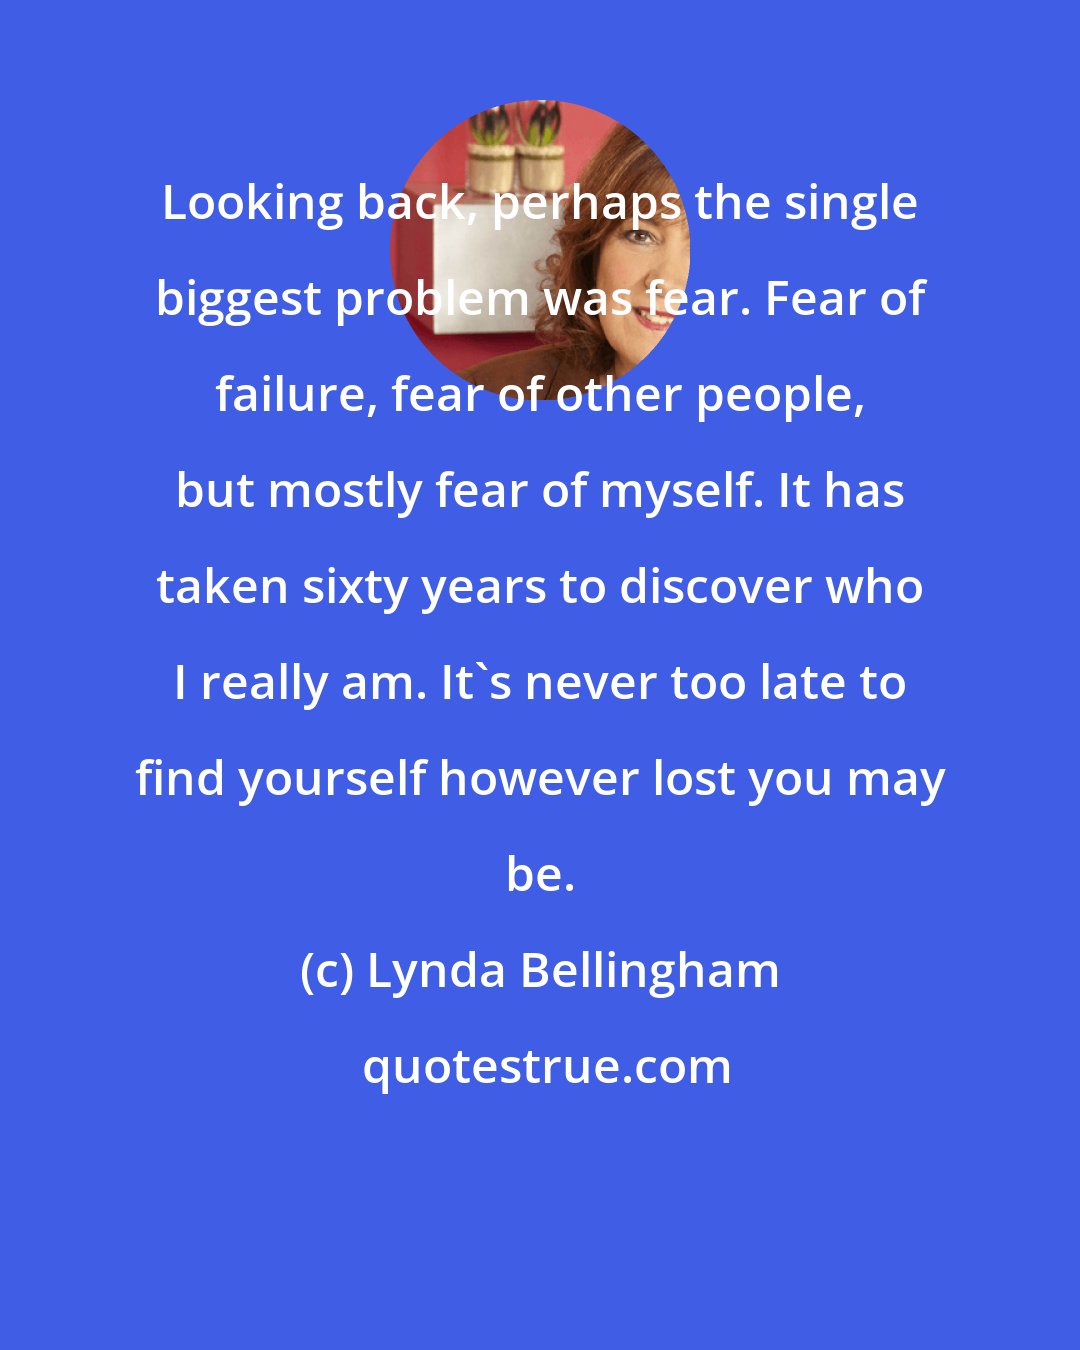 Lynda Bellingham: Looking back, perhaps the single biggest problem was fear. Fear of failure, fear of other people, but mostly fear of myself. It has taken sixty years to discover who I really am. It's never too late to find yourself however lost you may be.